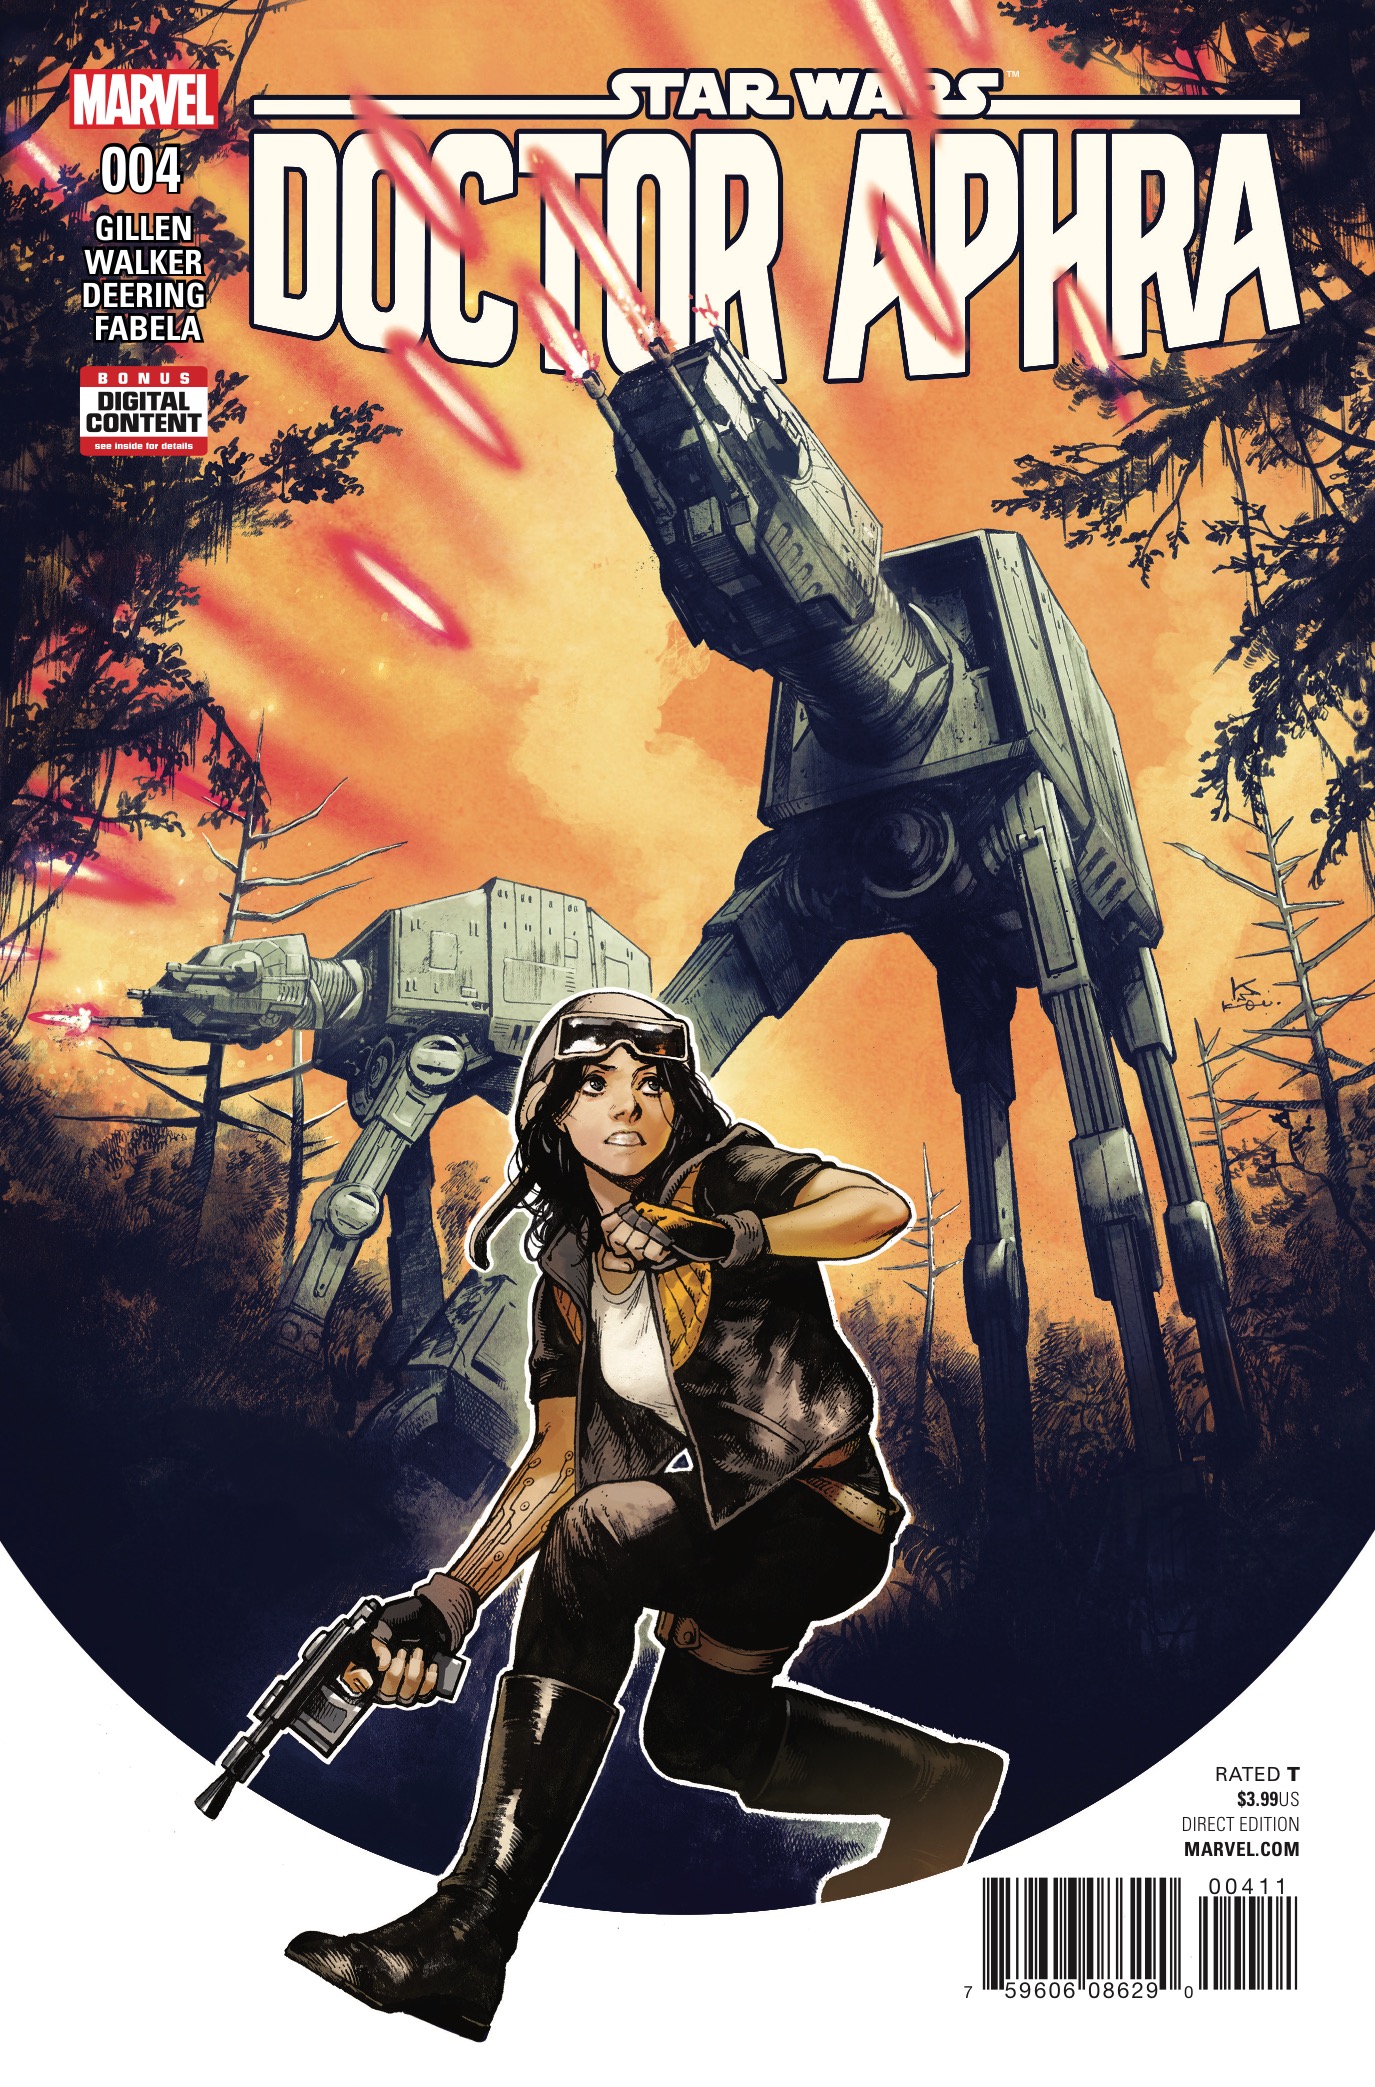 [EXCLUSIVE] Marvel Preview: Star Wars: Doctor Aphra #4